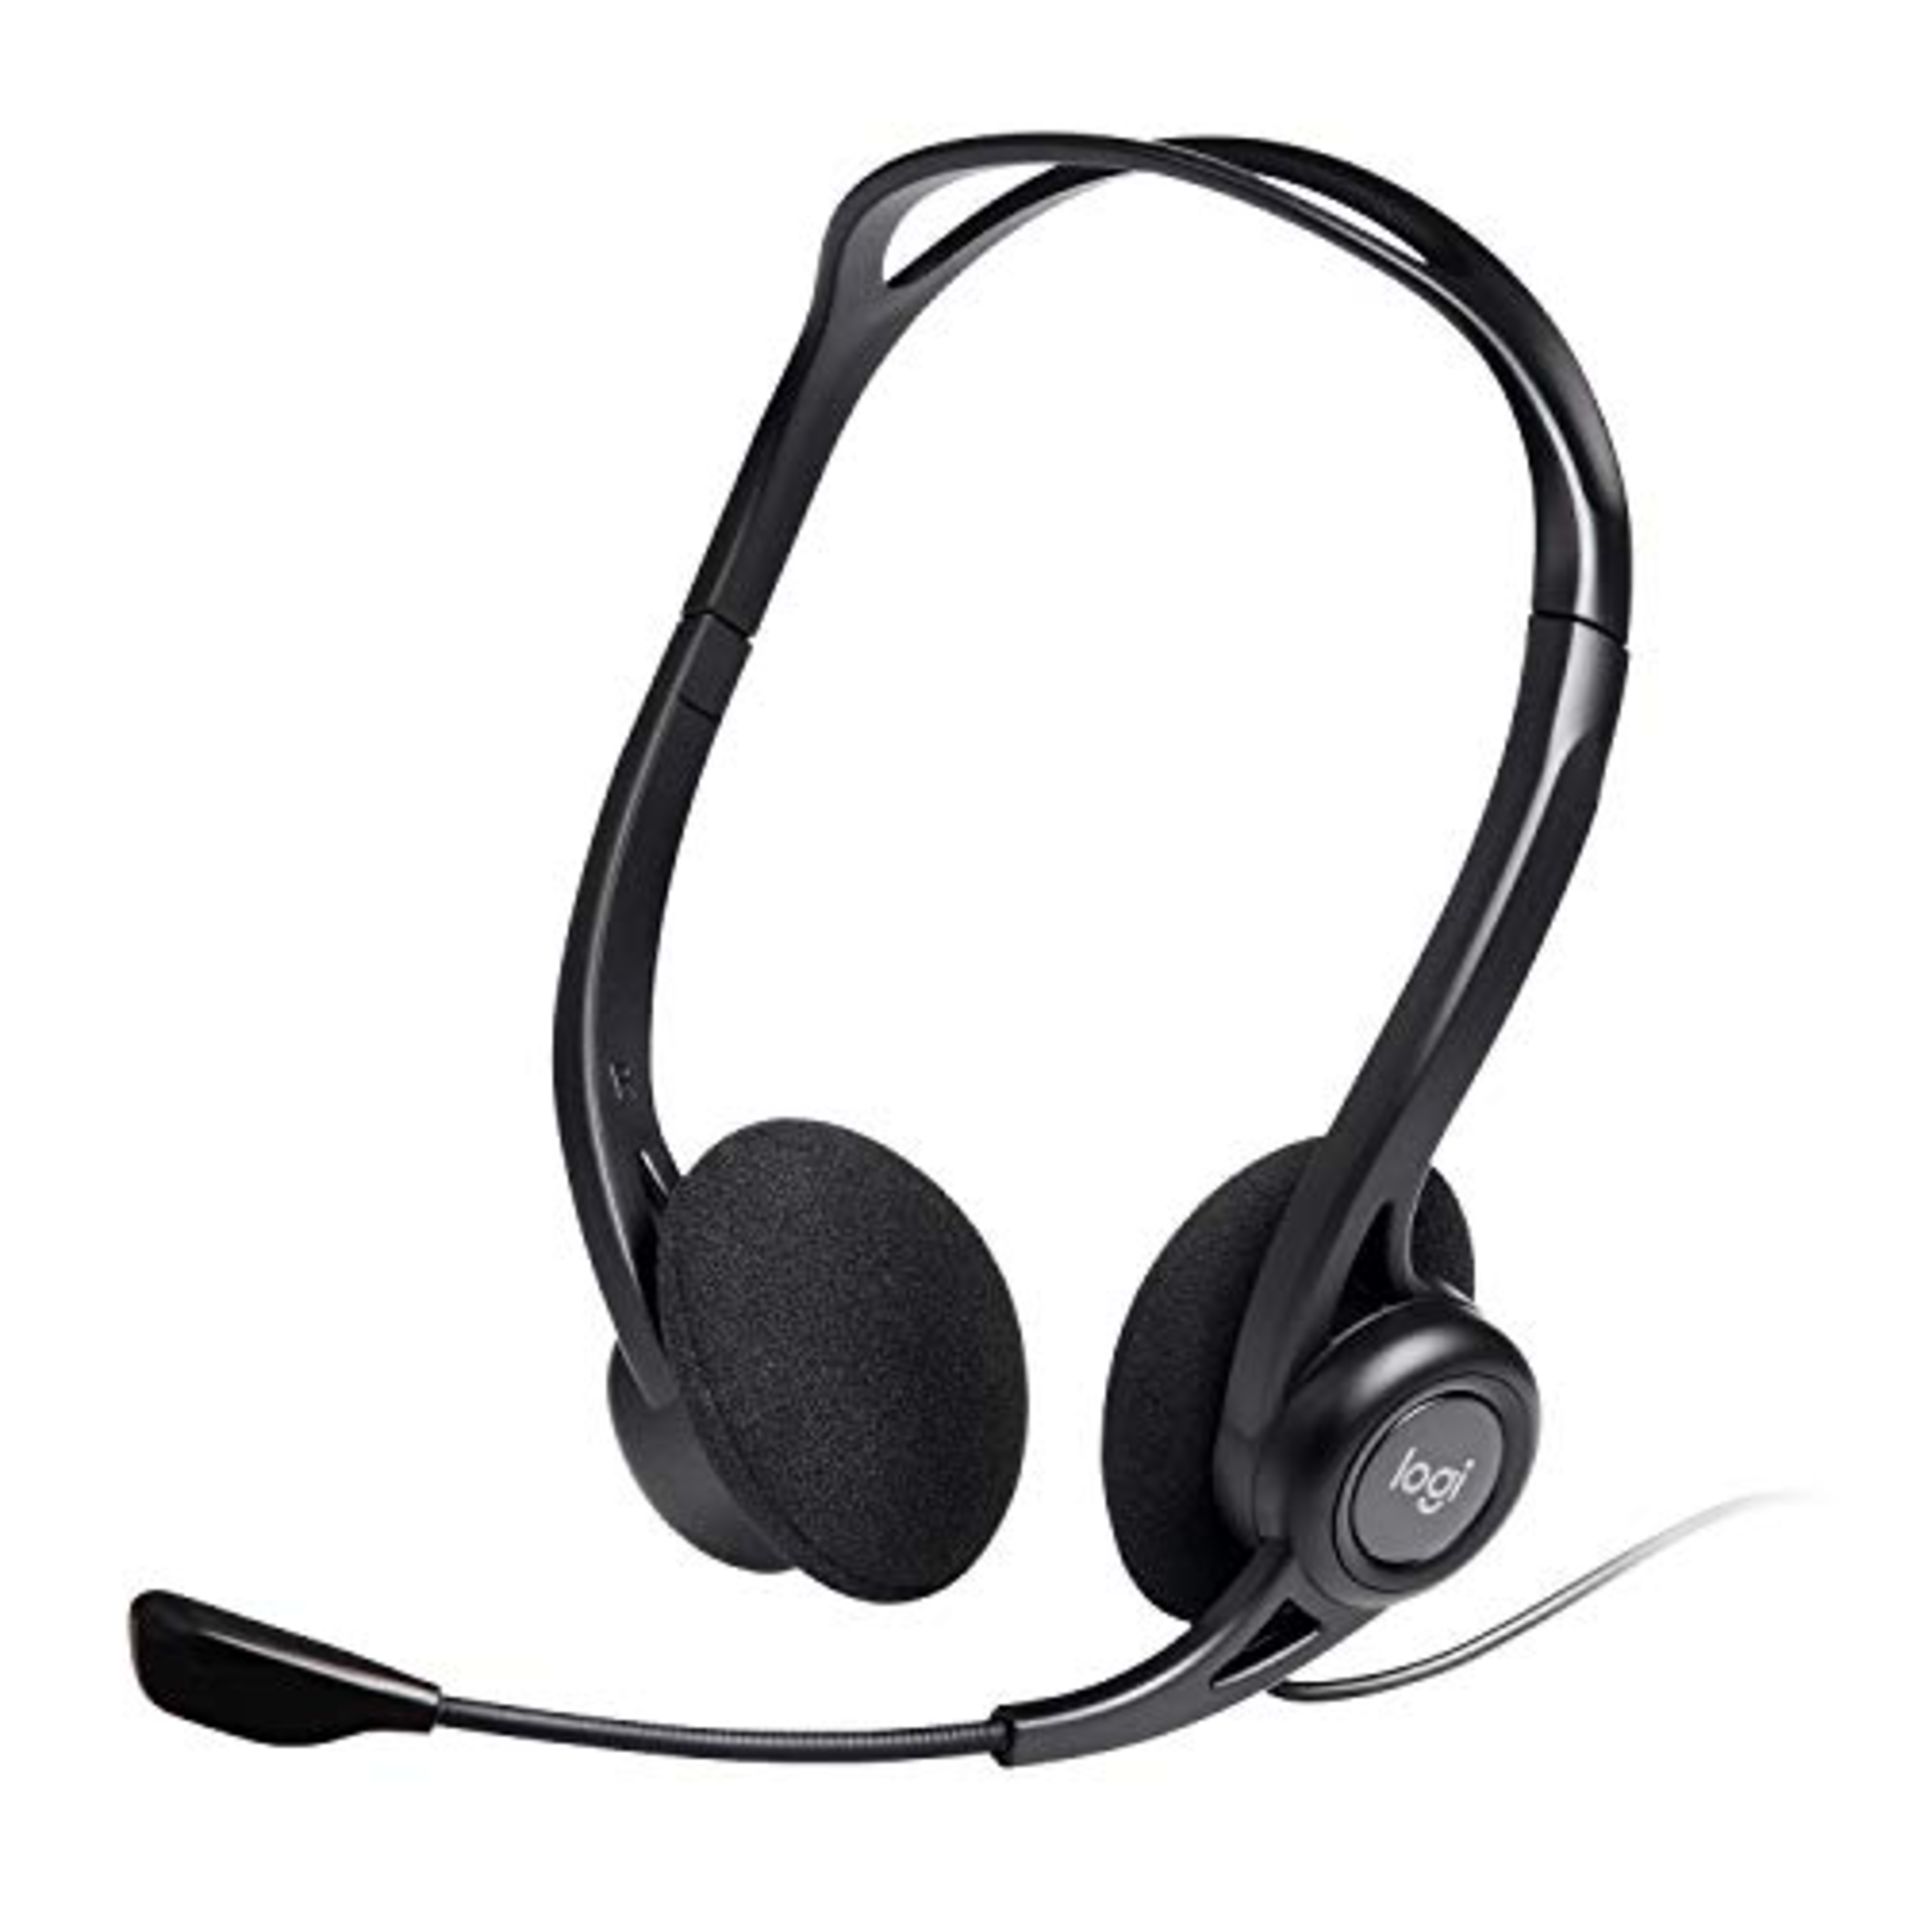 Logitech 960 Headphones, Stereo Headset, Adjustable Microphone with Noise Cancellation